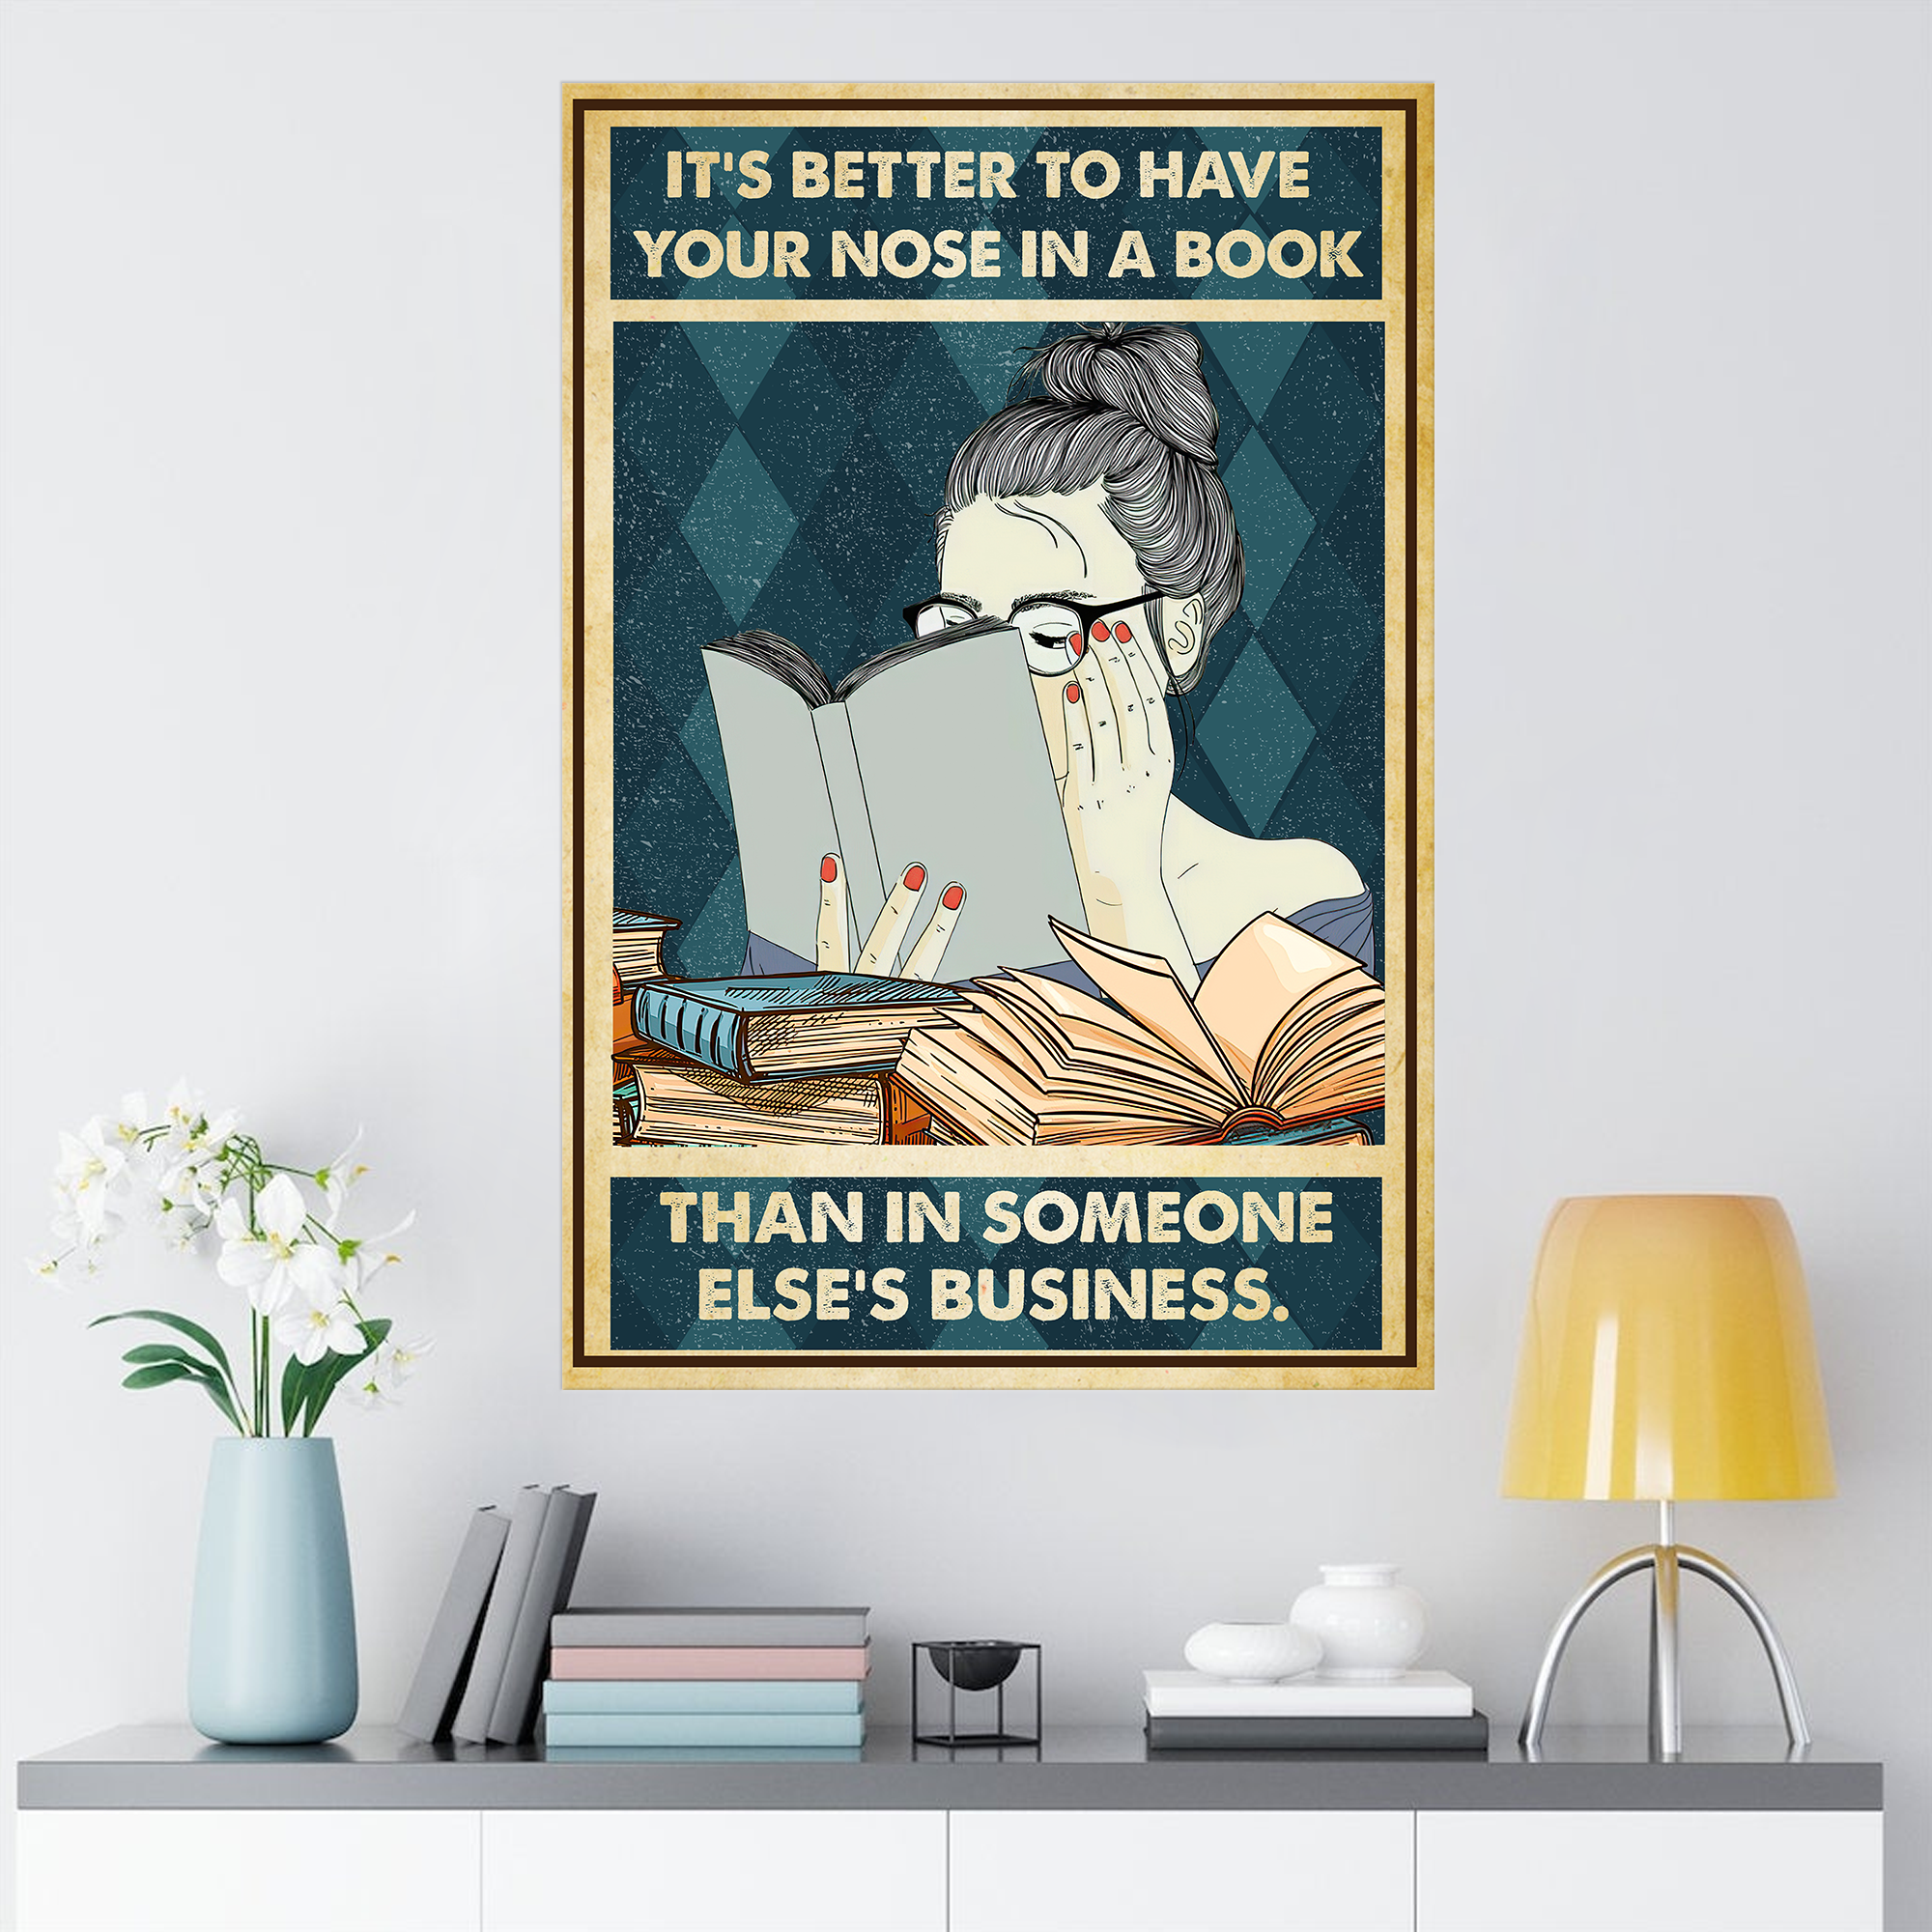 It’s Better To Have Your Nose In A Book Than In Someone Else’s Business Poster